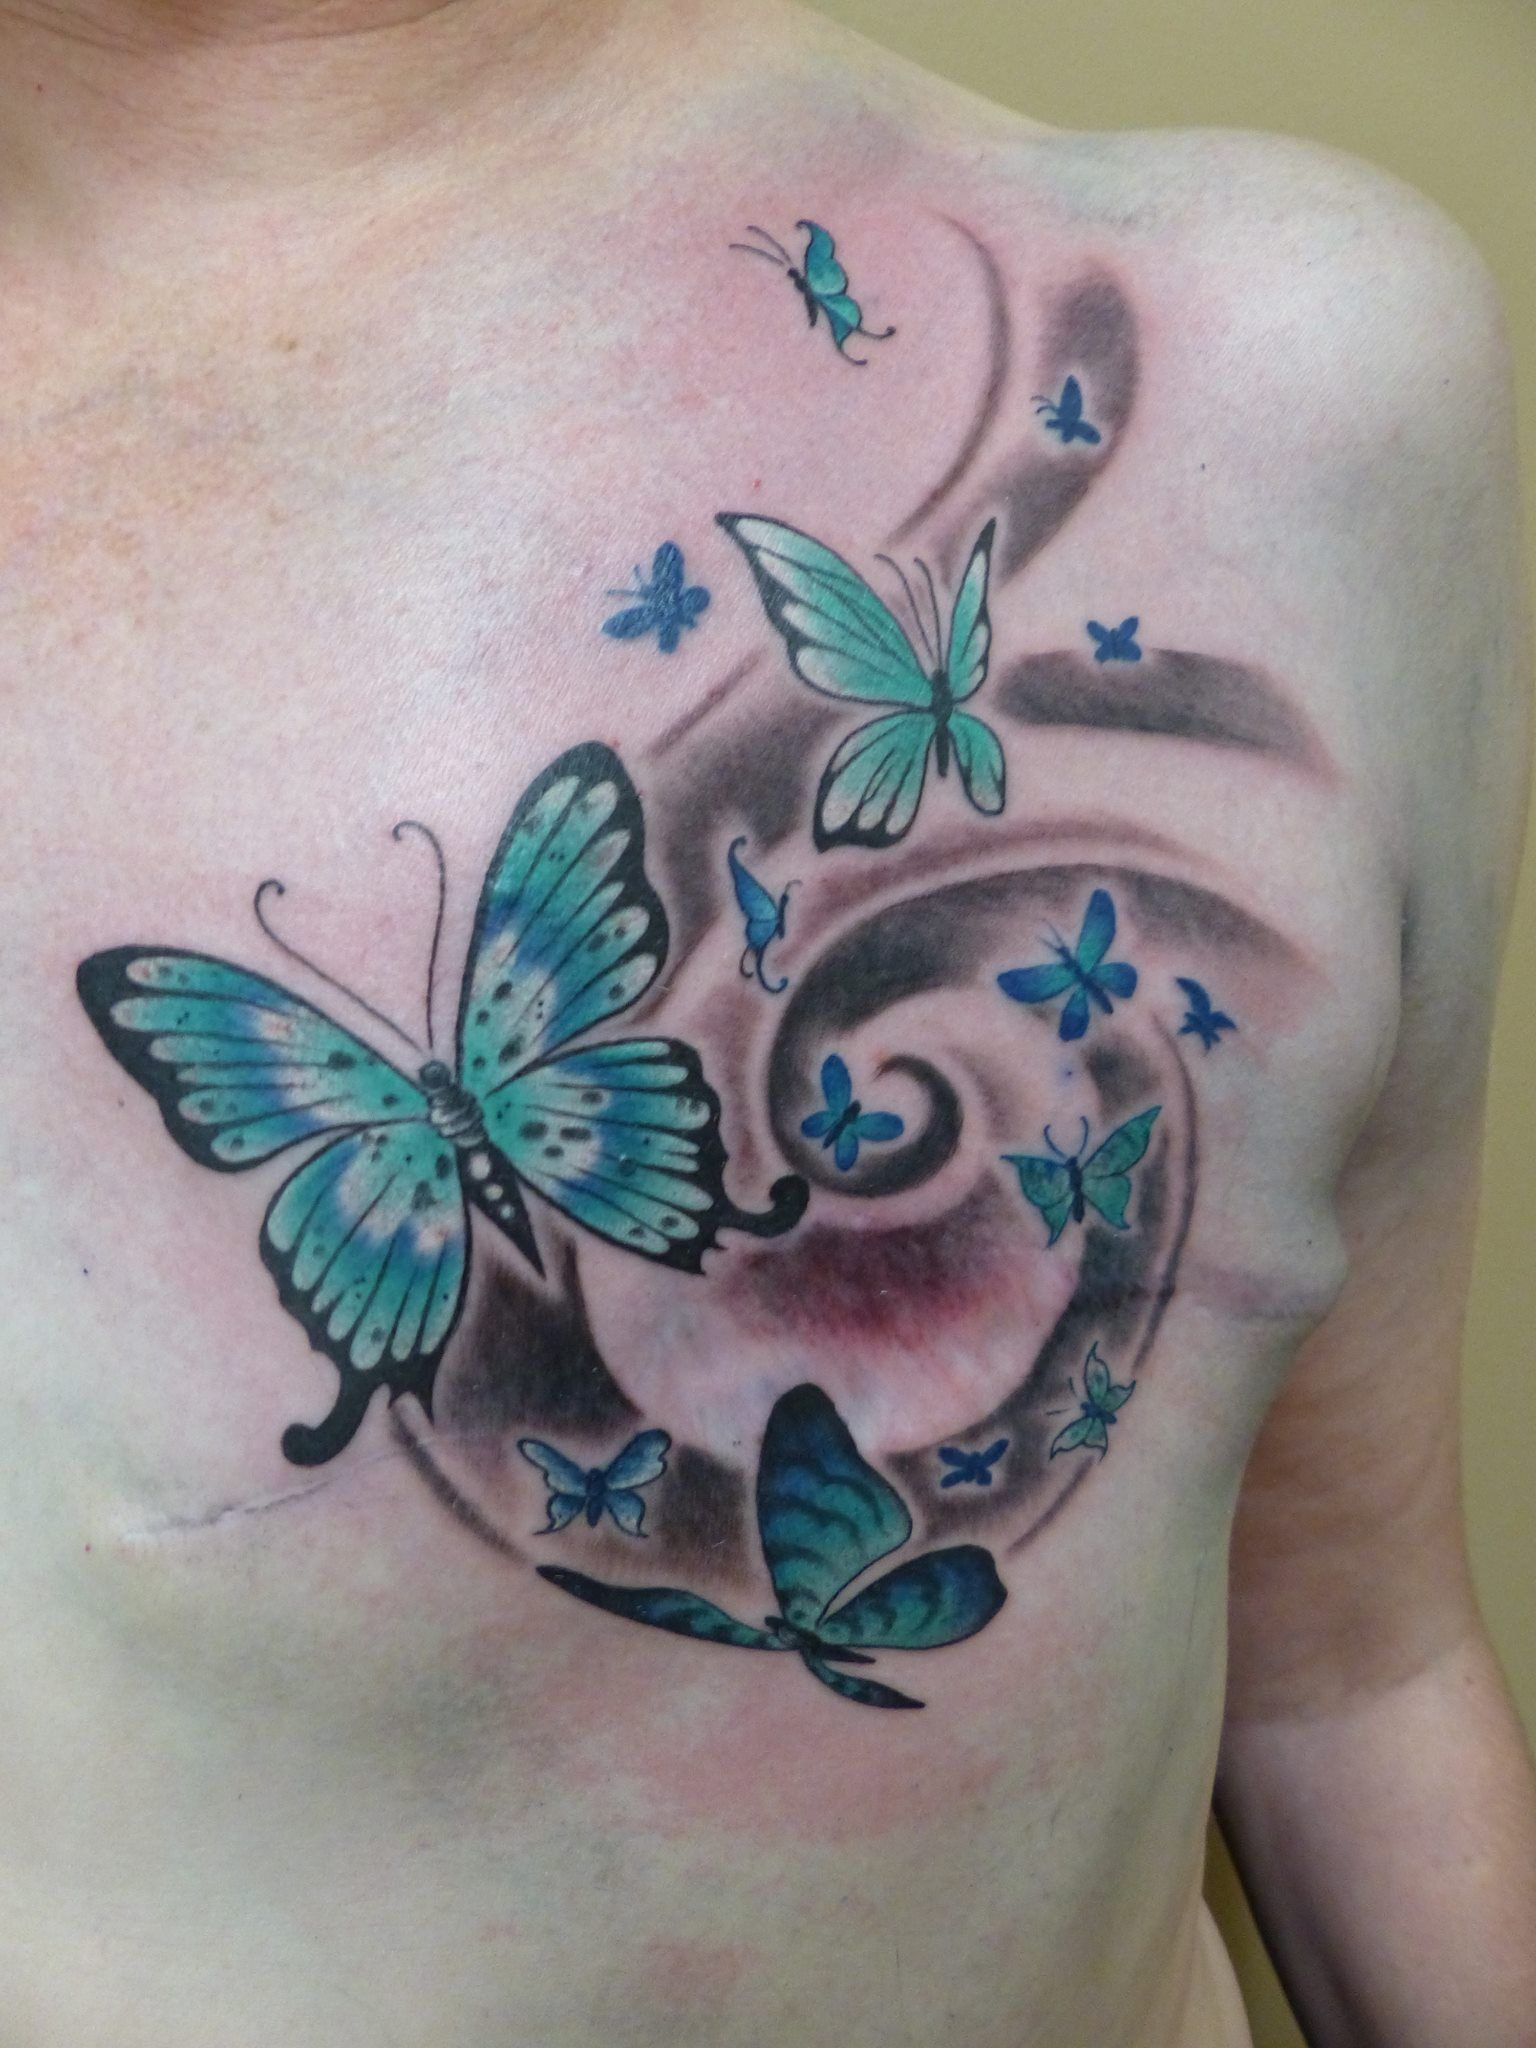 Flowing Butterflies Inspiring Mastectomy Tattoo Stacie Rae pertaining to size 1536 X 2048